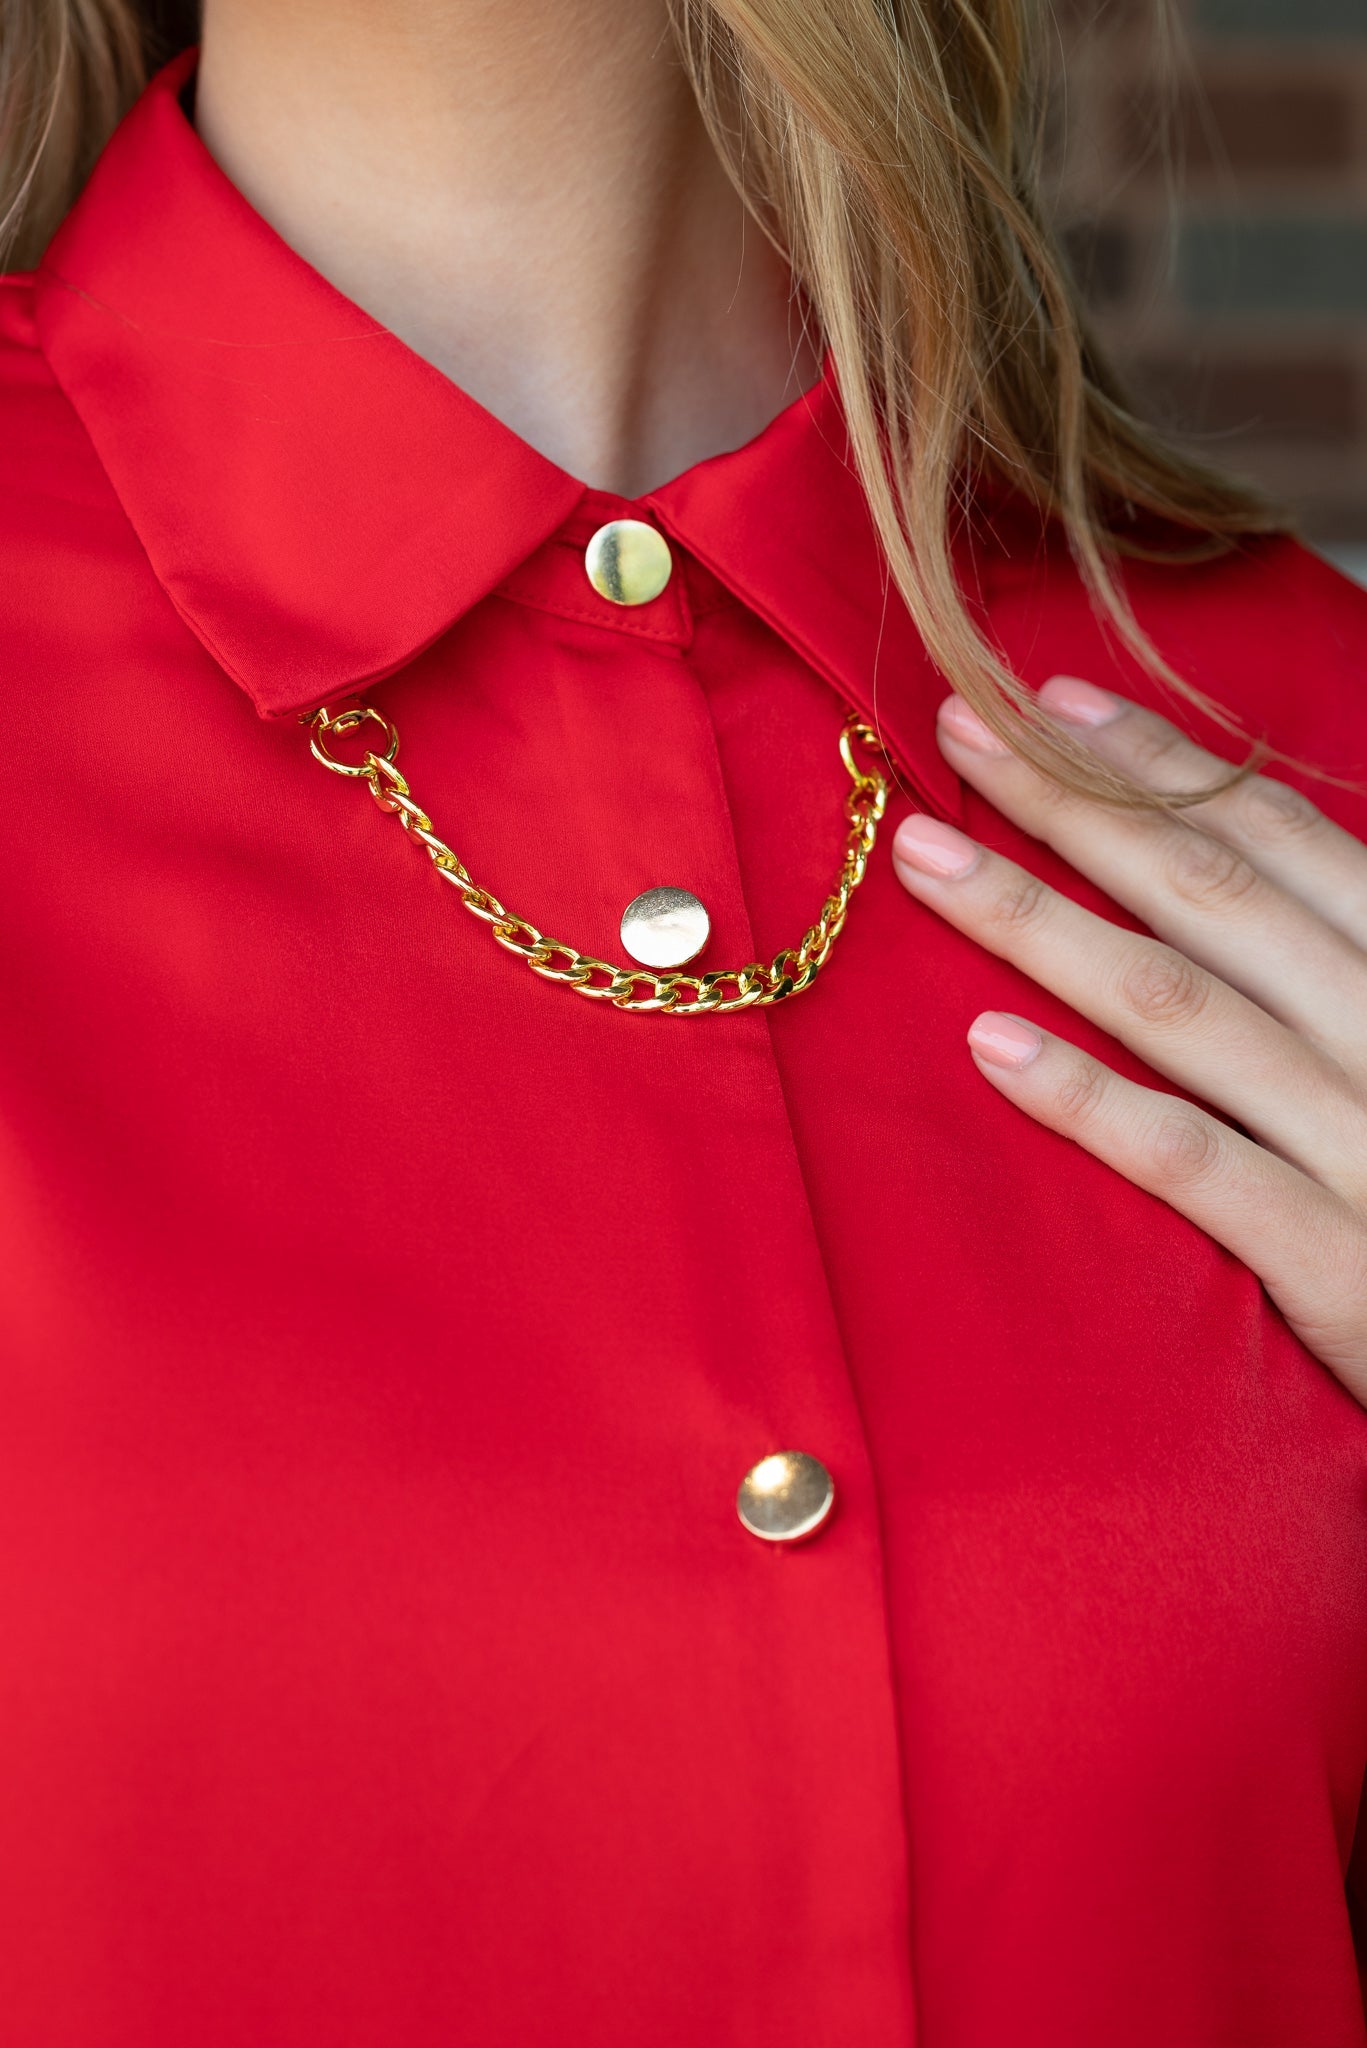 Shirt, Silky Red, Gold Chain/Buttons